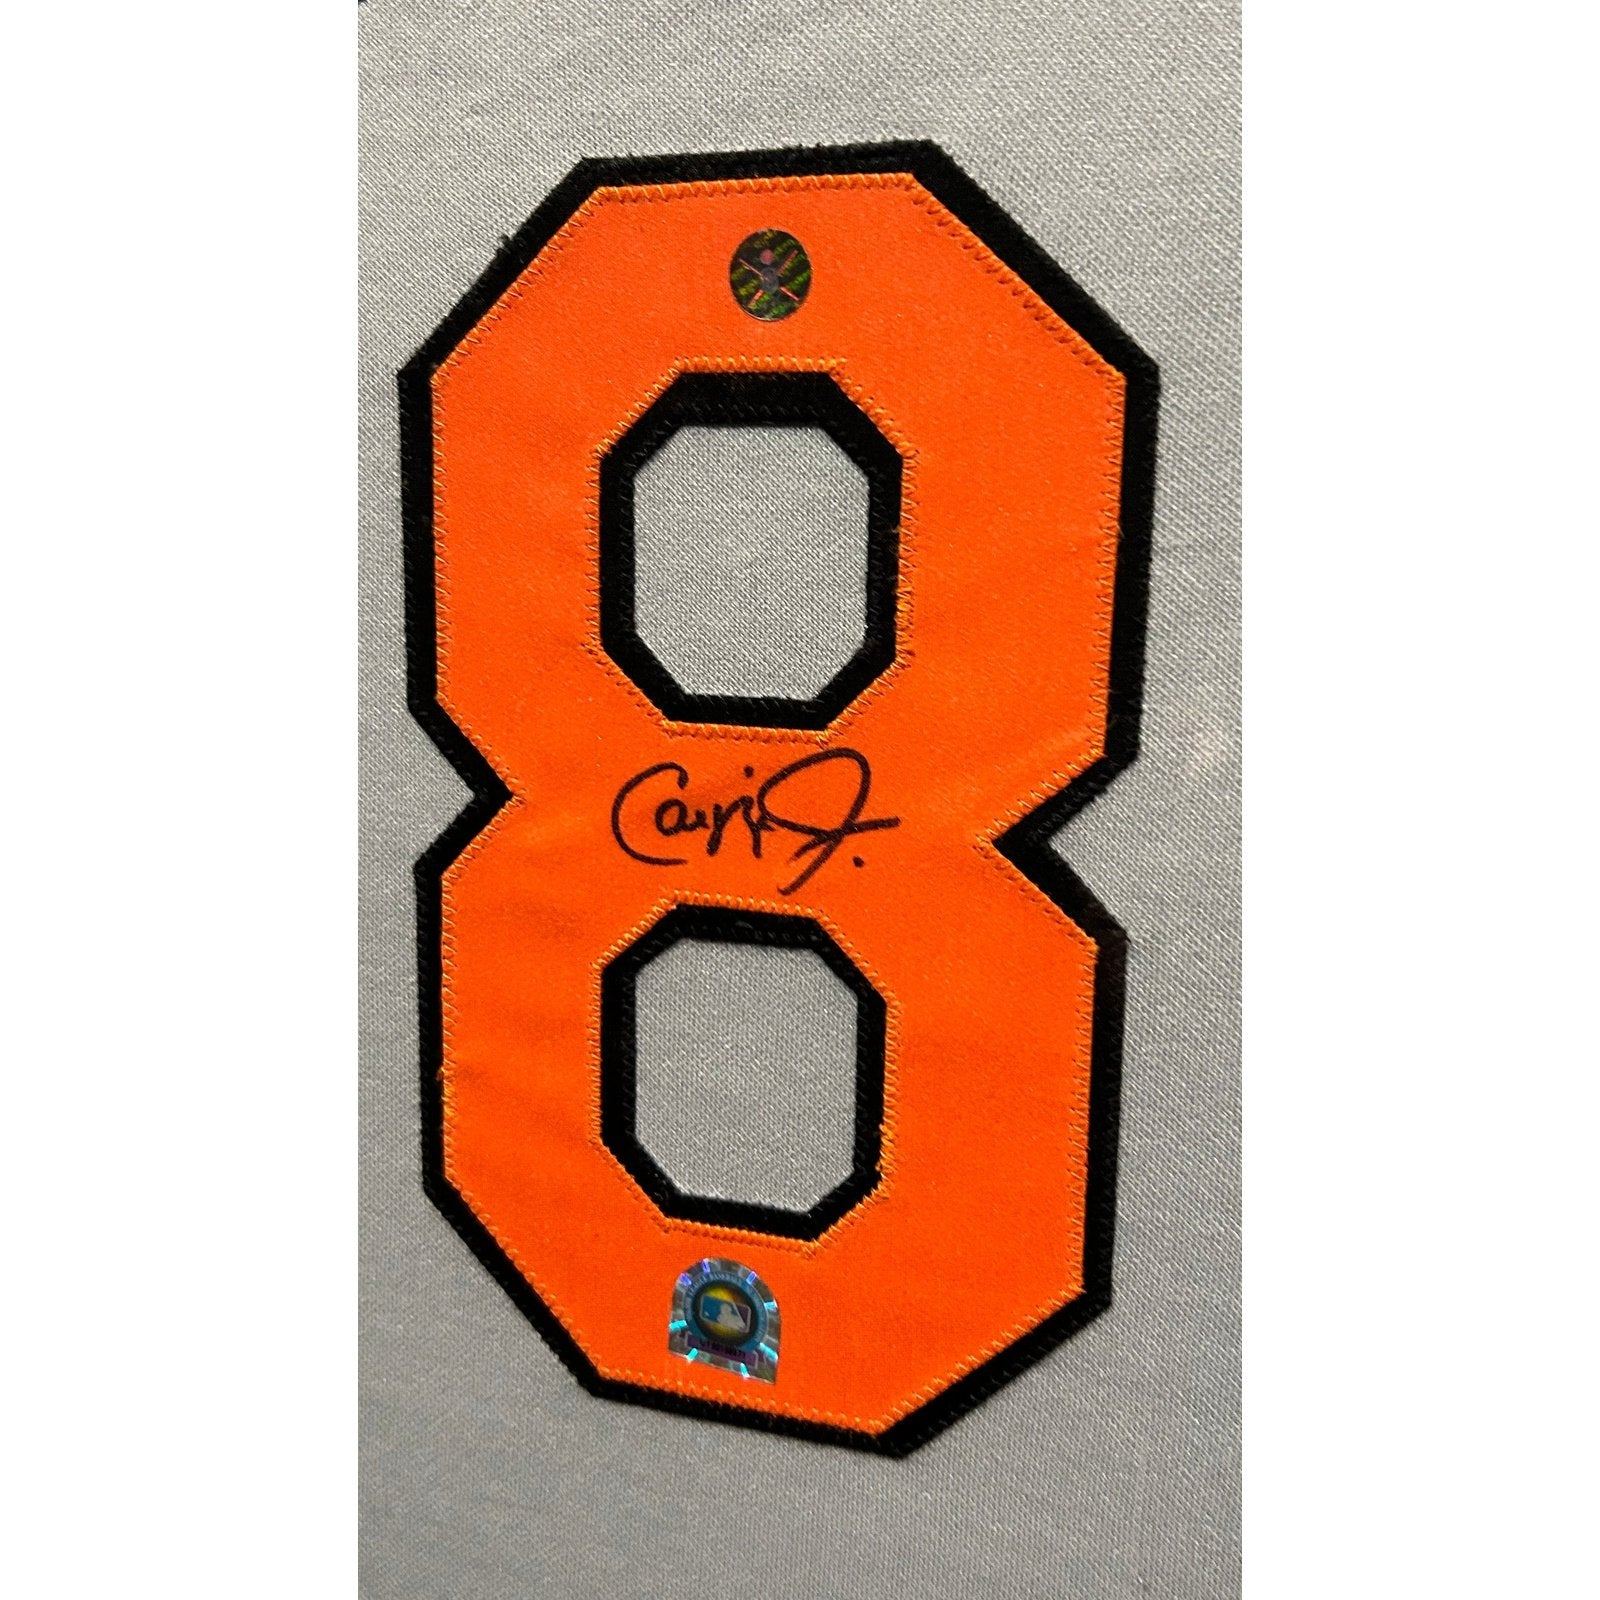 Cal Ripken Framed Signed Jersey MLB Authenticated Autographed Baltimor